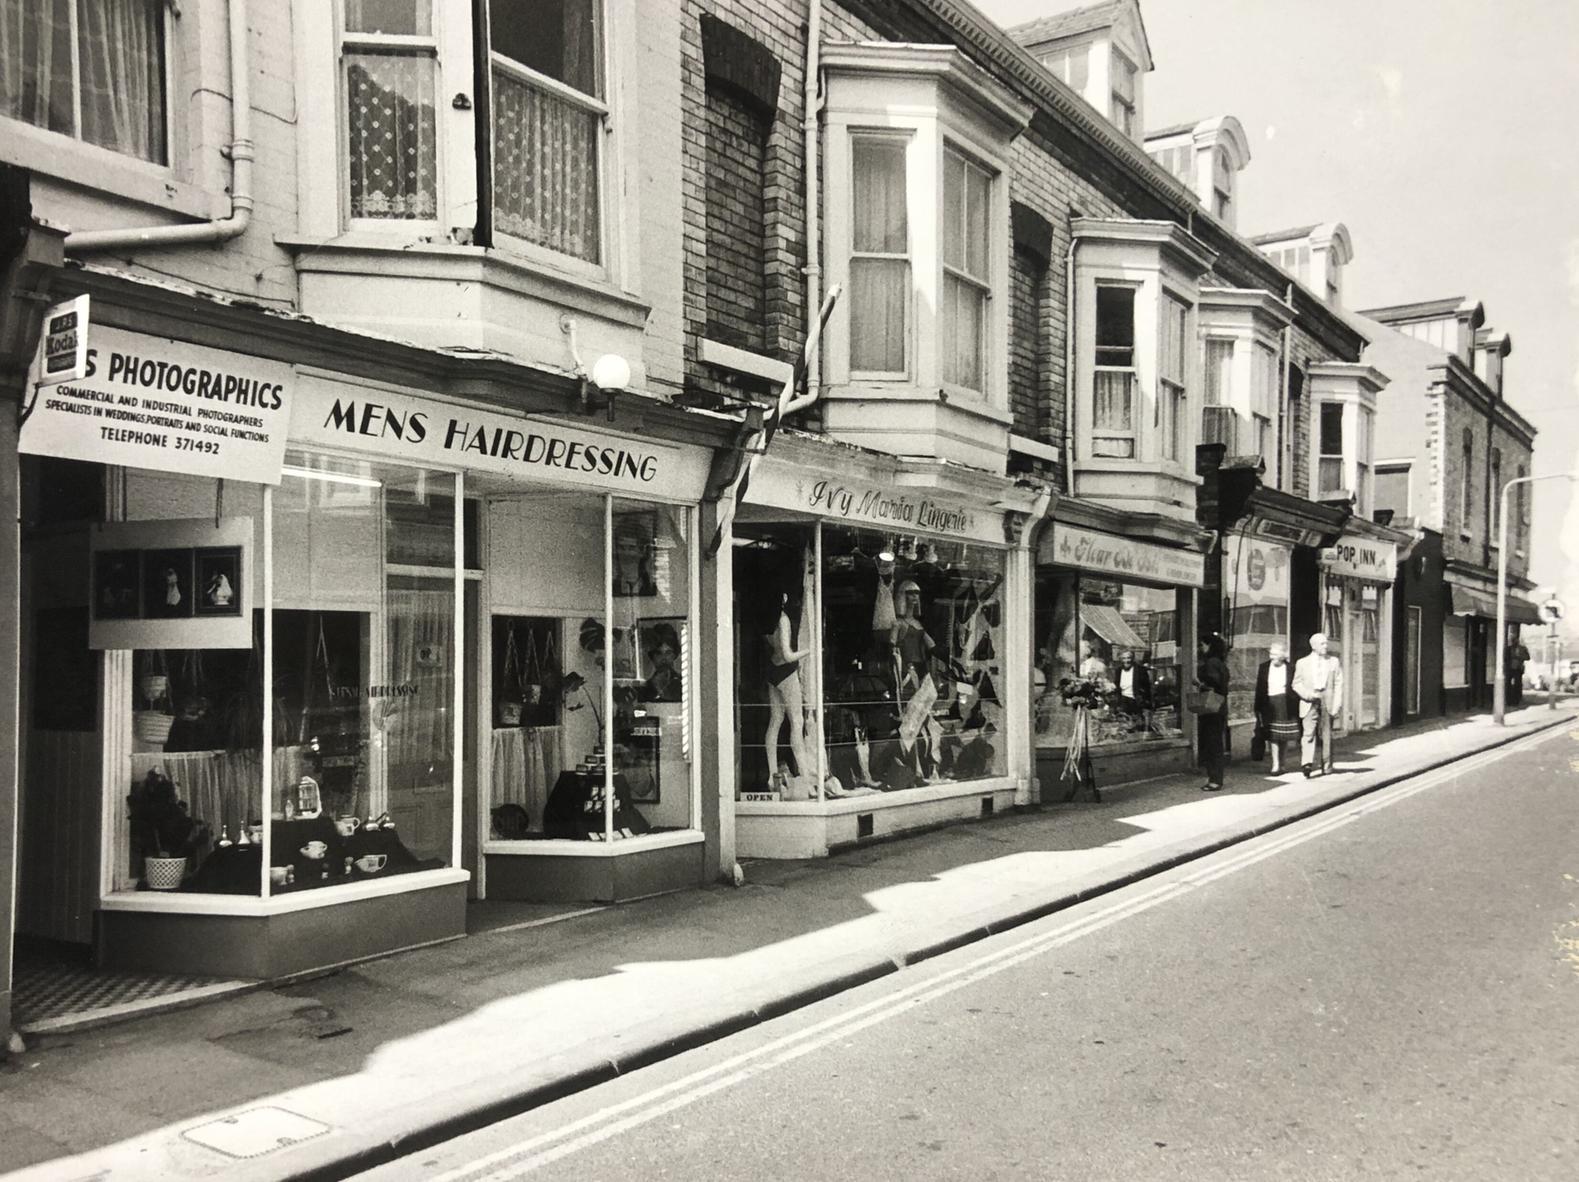 The buildings on Hanover Road may still be recognisable but the businesses have moved on since this picture was taken in 1987.